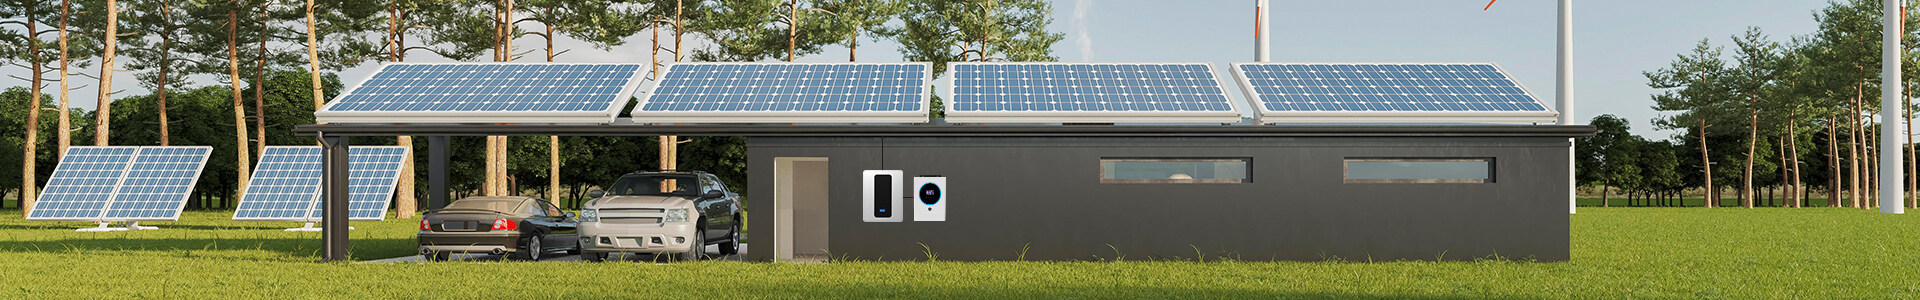 What Are the Differences Between Off-Grid, On-Grid, and Hybrid Inverters?